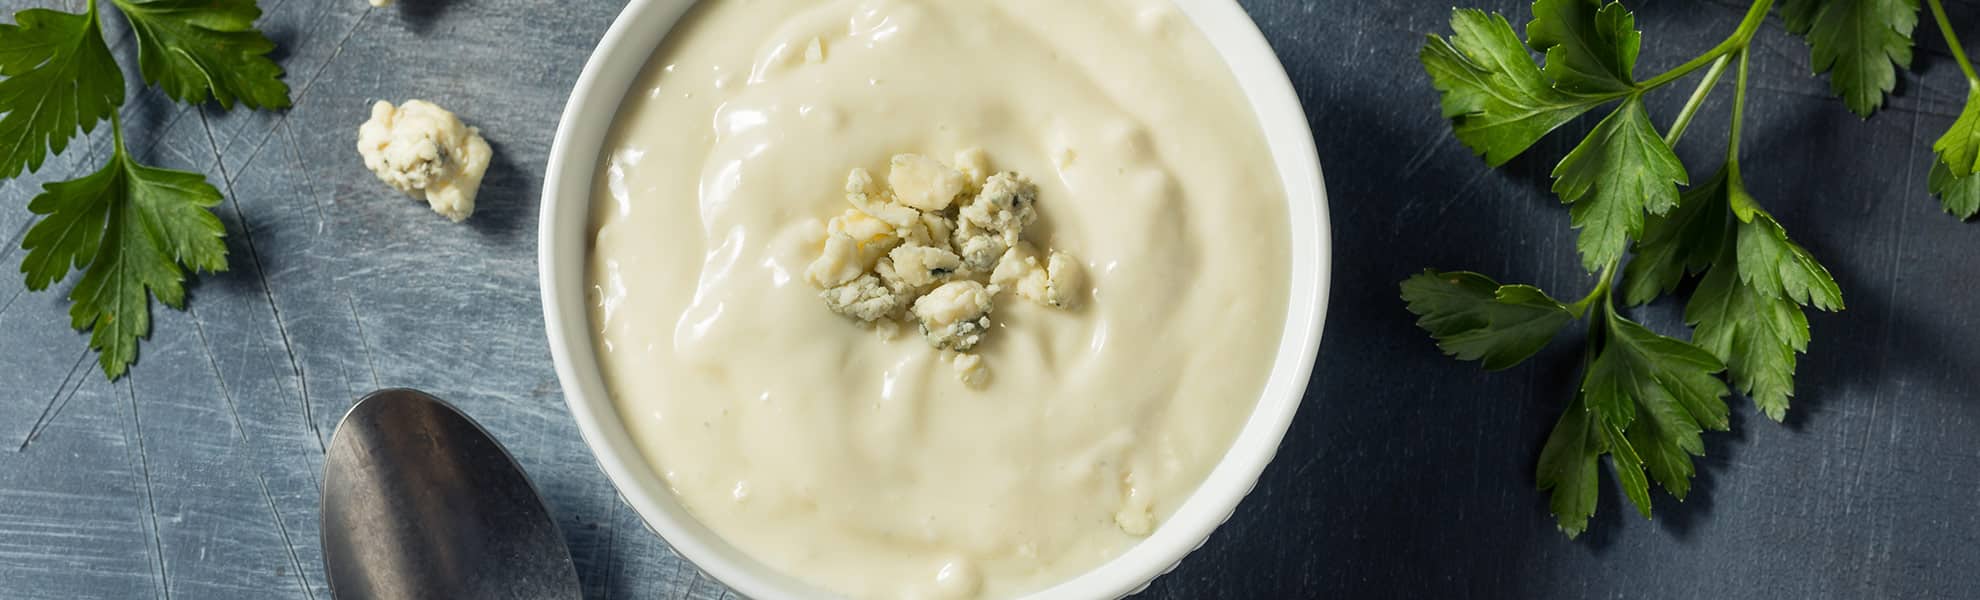 Our family recipe for creamy blue cheese steak sauce includes wine and pairs perfectly with Filet Mignon, Beef Tenderloin, or your other favorite steak